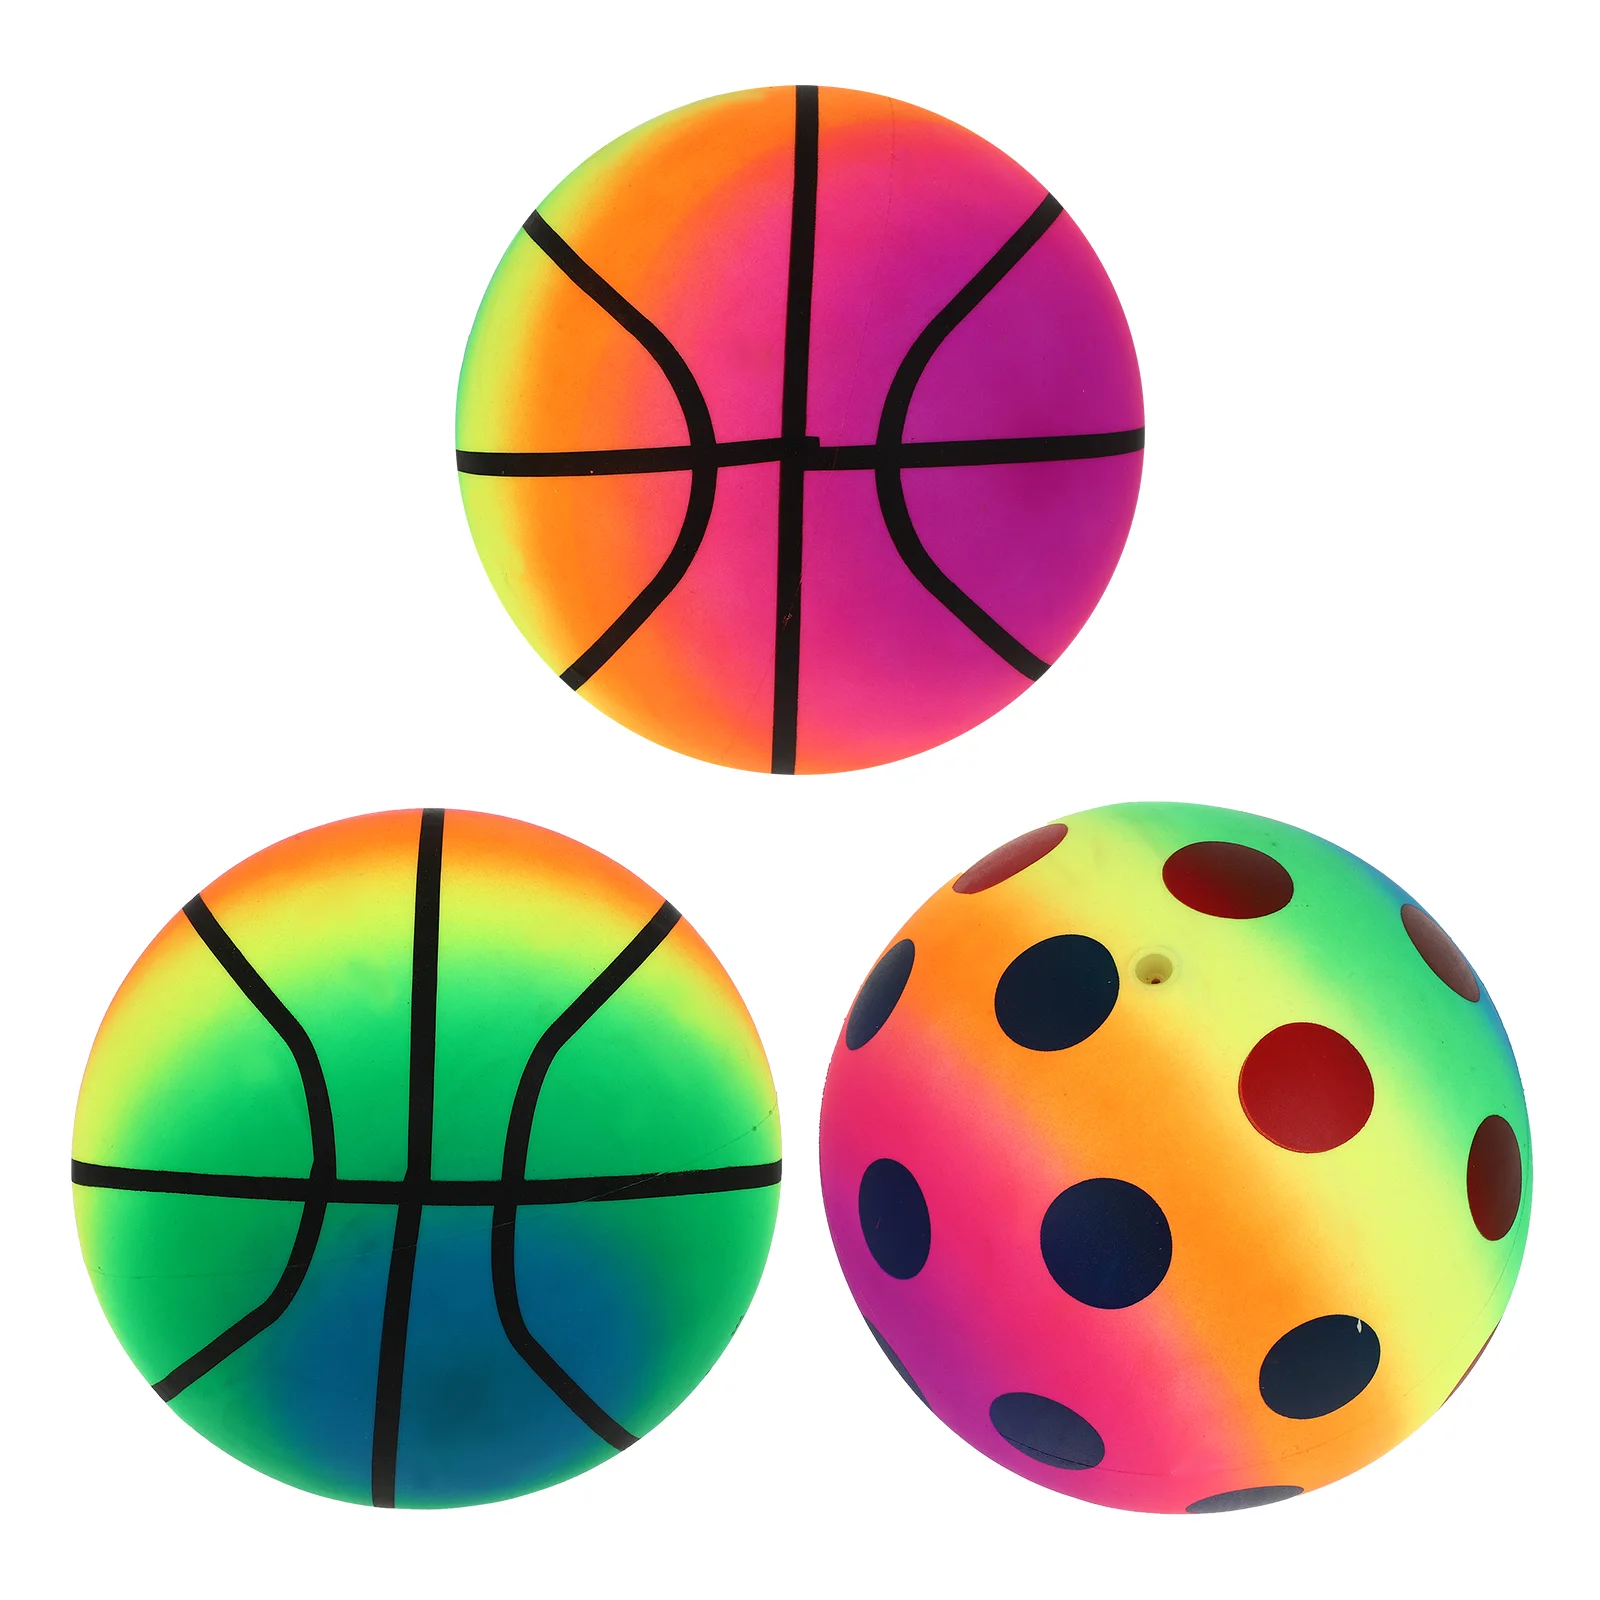 

Beach Classic 8 6 Inches Colorful Beachball Game Inflation Beach Sports Play for Kids, Teenager Random Pattern3pcsToddler Toys